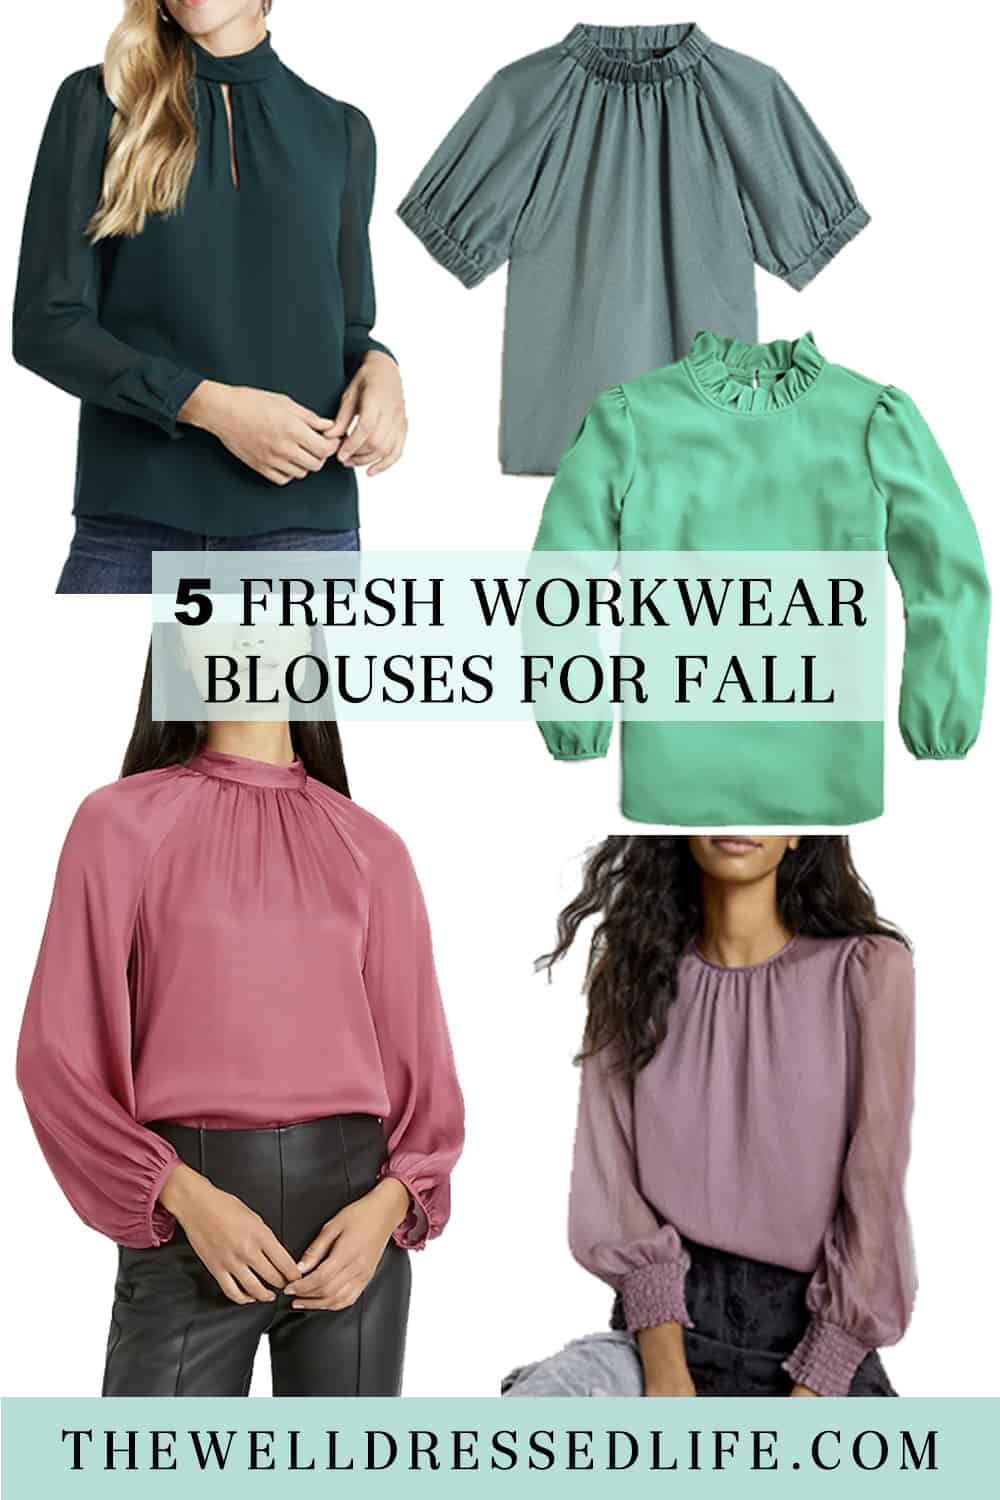 5 Fresh Workwear Blouses for Fall